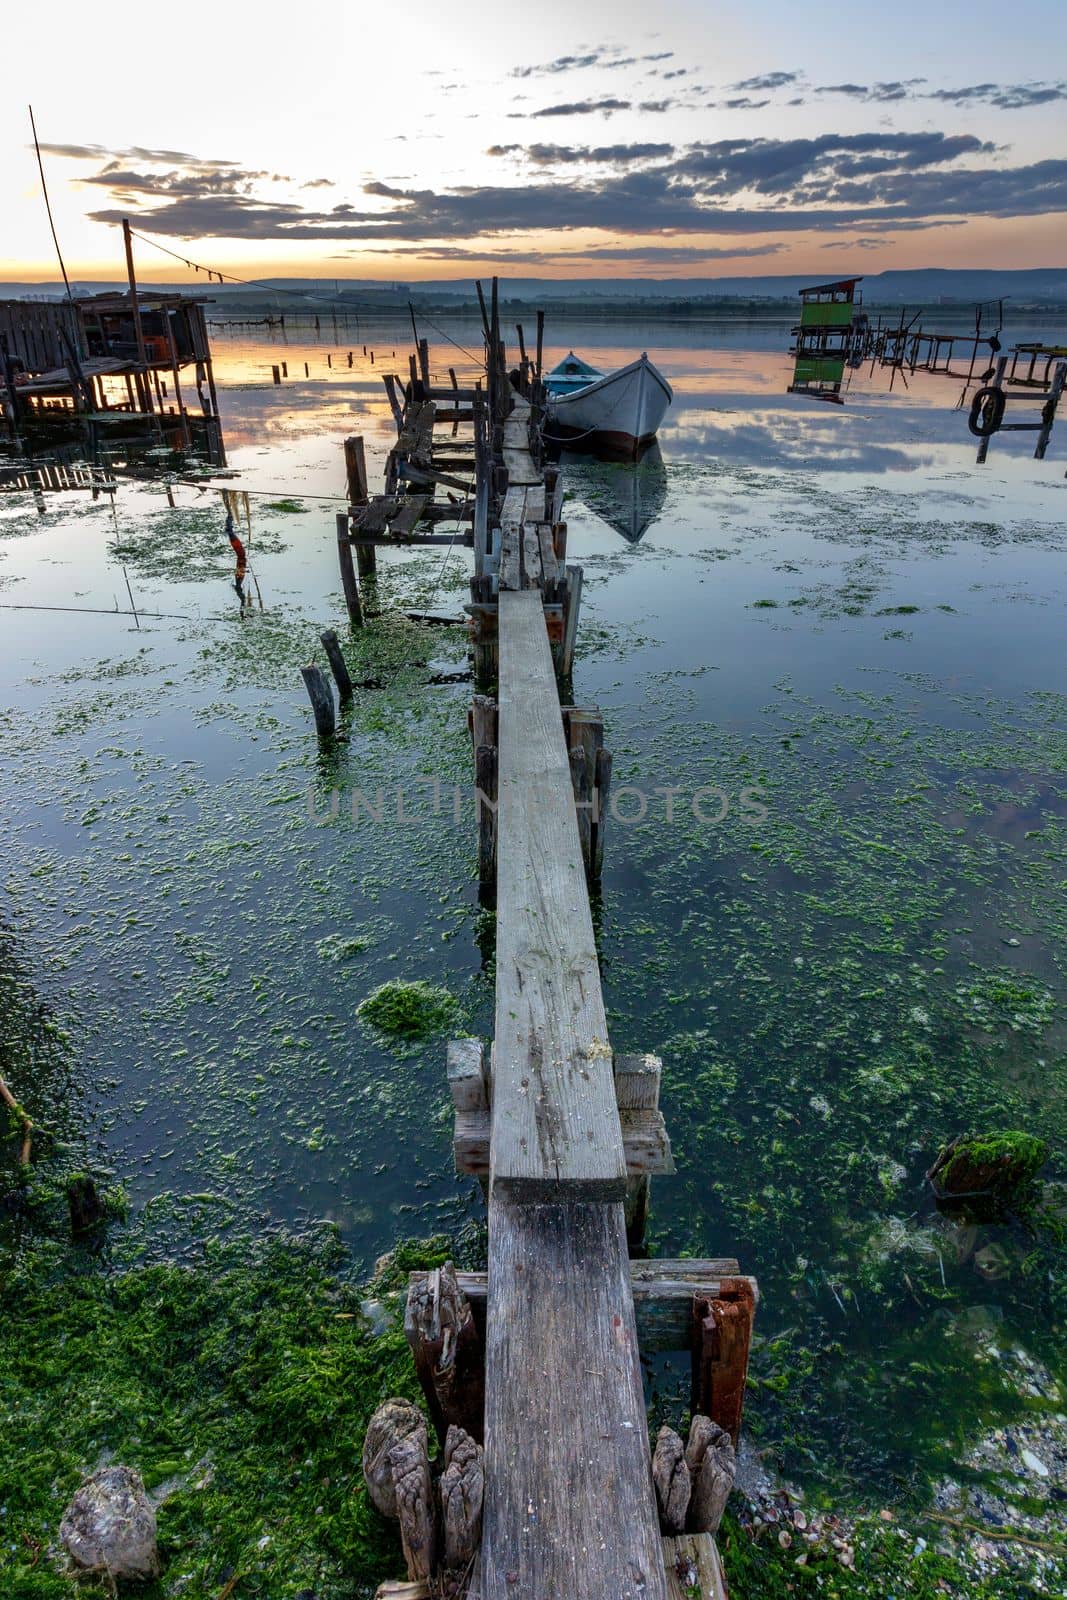 exciting long exposure landscape on a lake with wooden pier and boat .